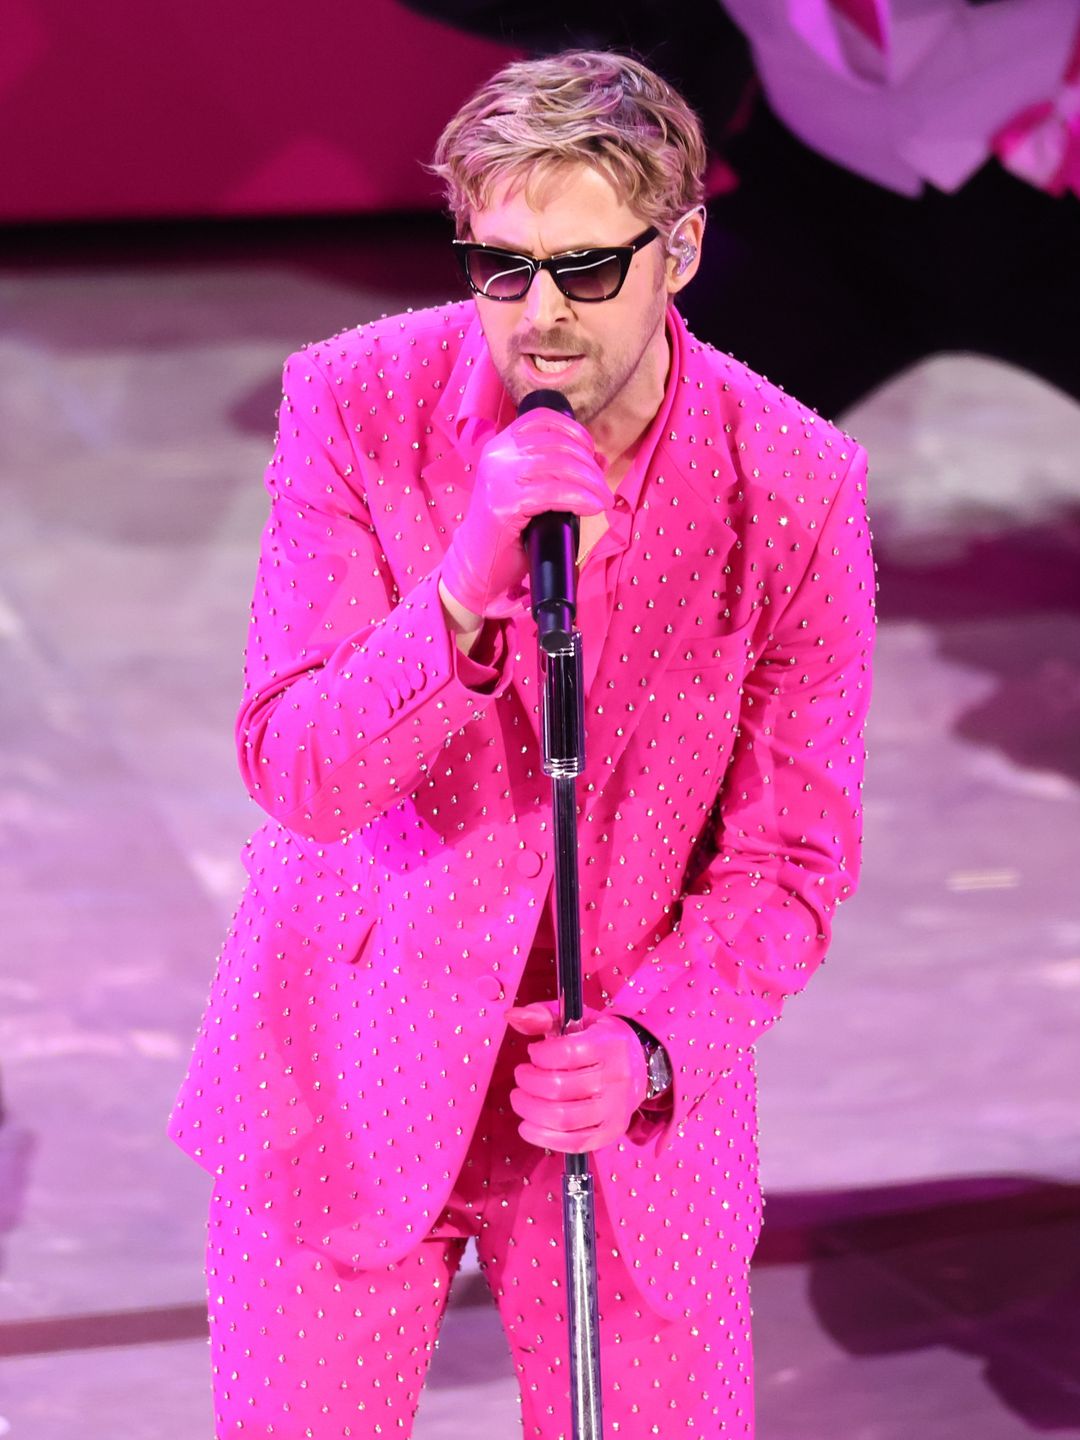 Ryan Gosling performing in hot pink from head-to-toe